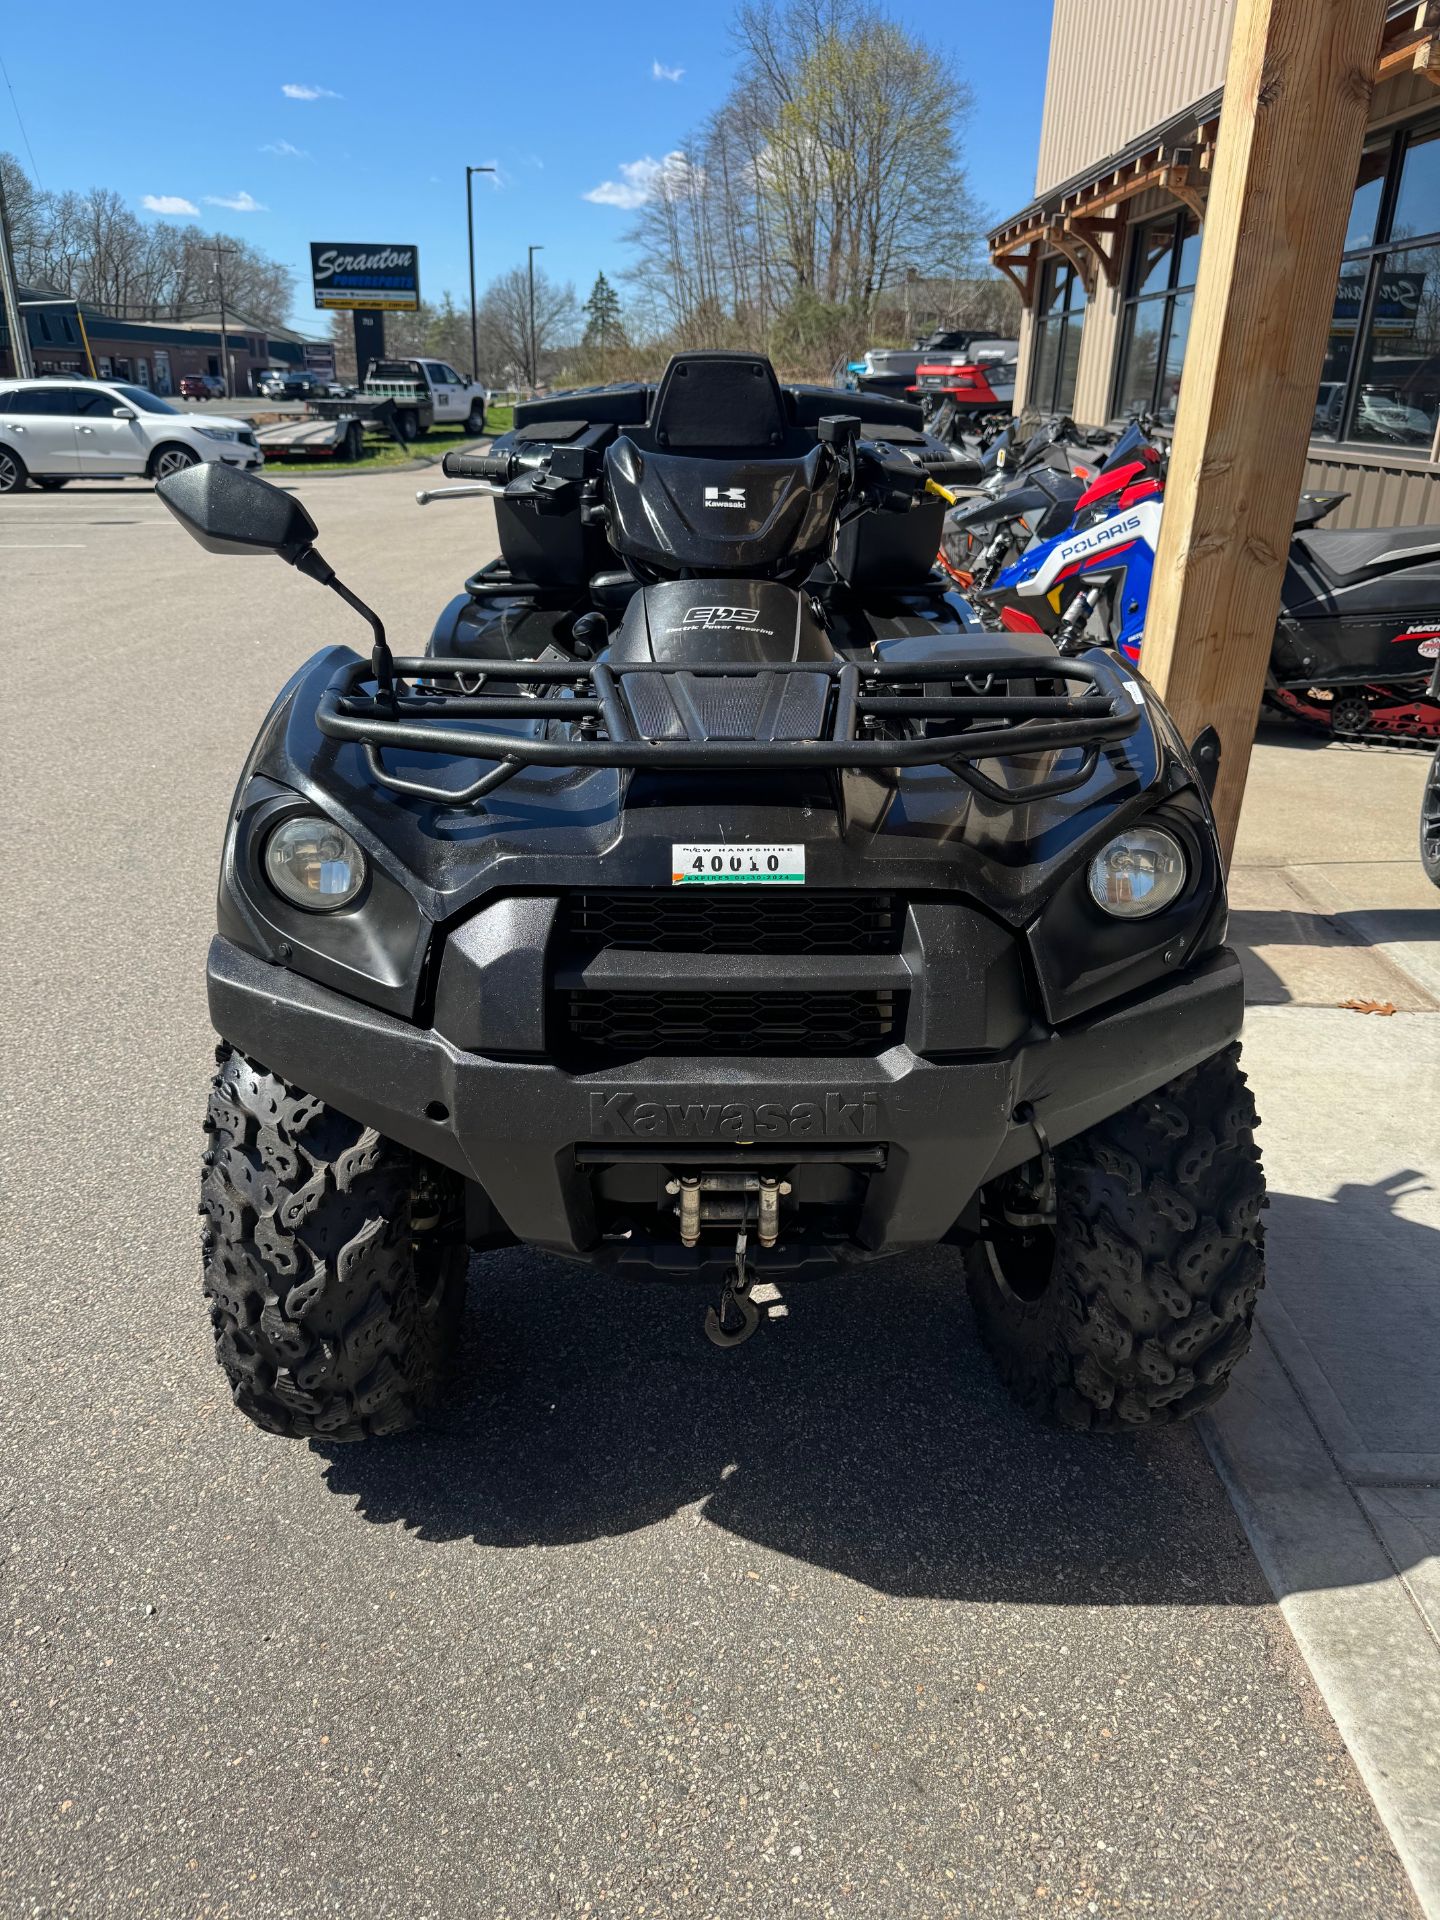 2021 Kawasaki Brute Force 750 4x4i EPS in Vernon, Connecticut - Photo 2